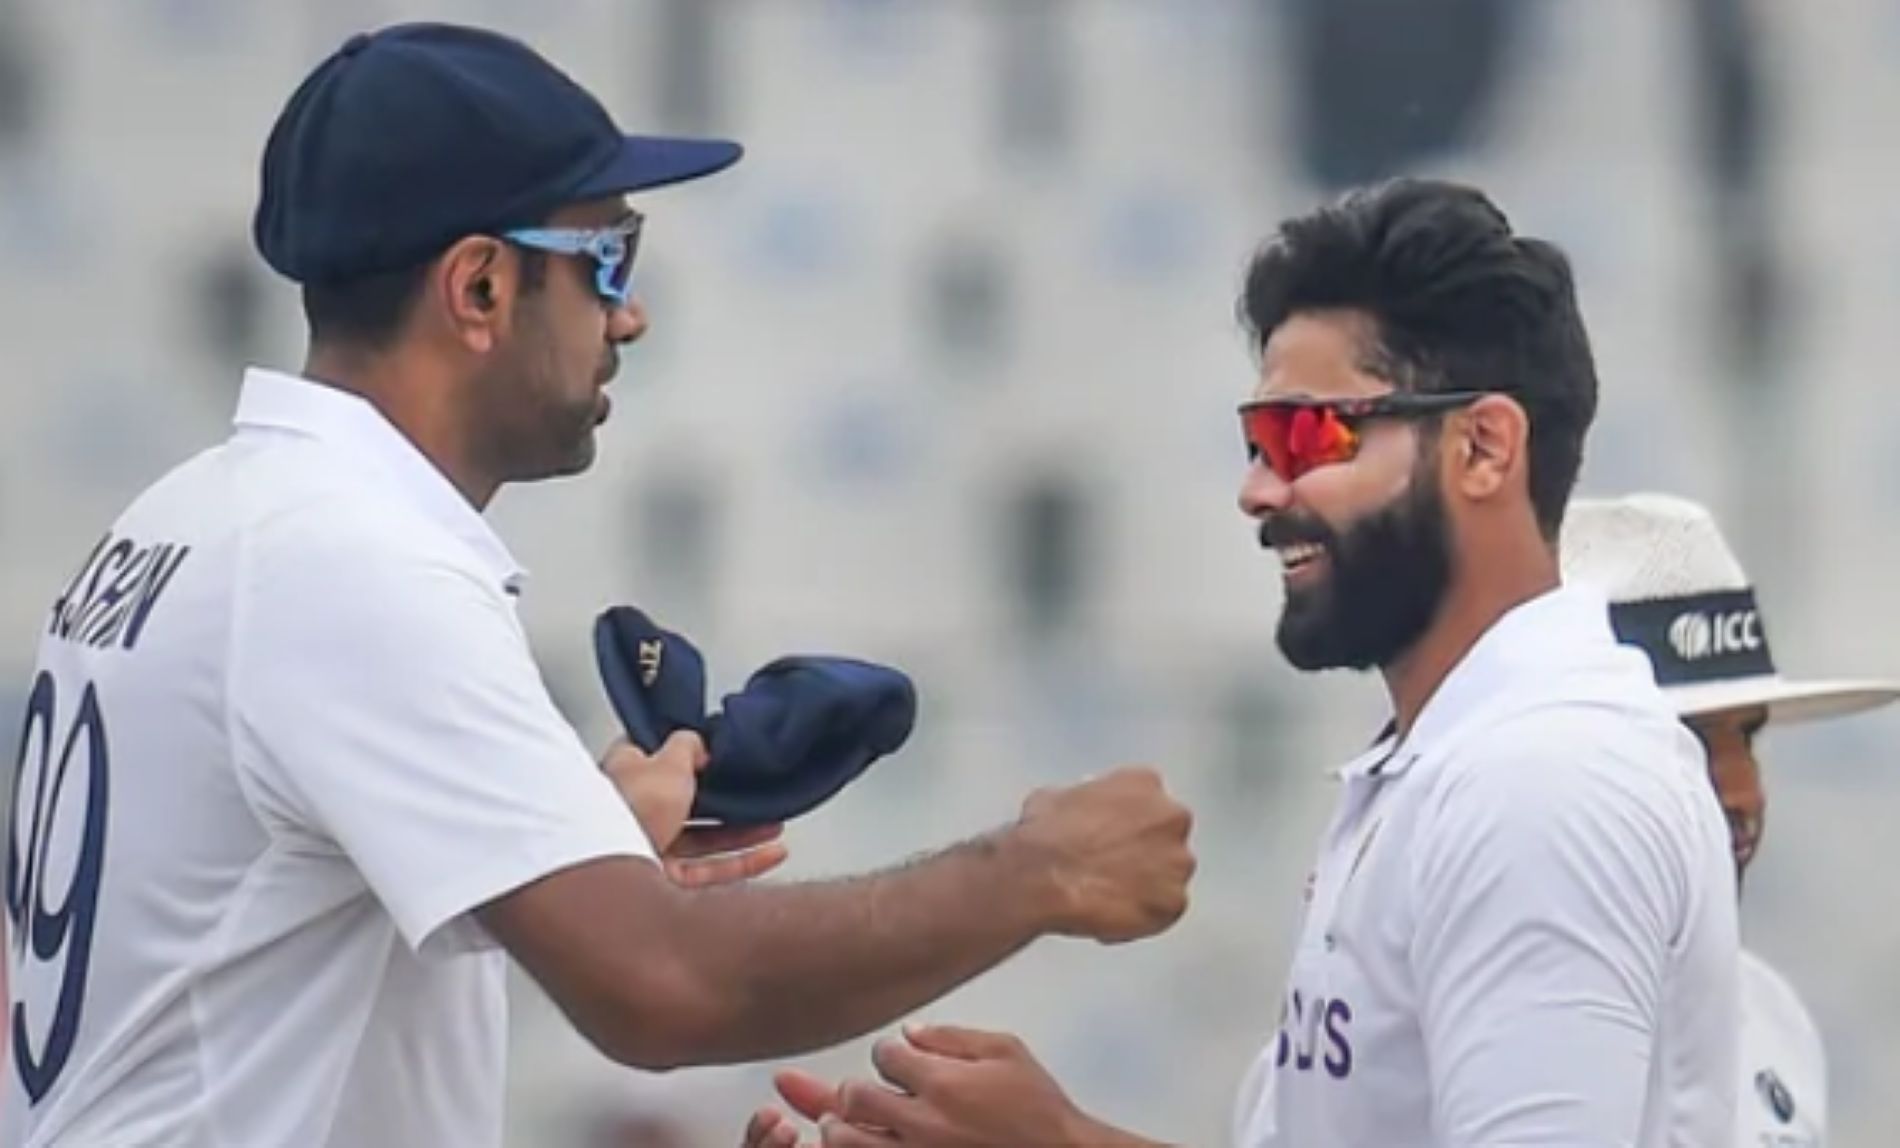 Ravichandran Ashwin and Ravindra Jadeja have formed the best Test spin duo in world cricket.